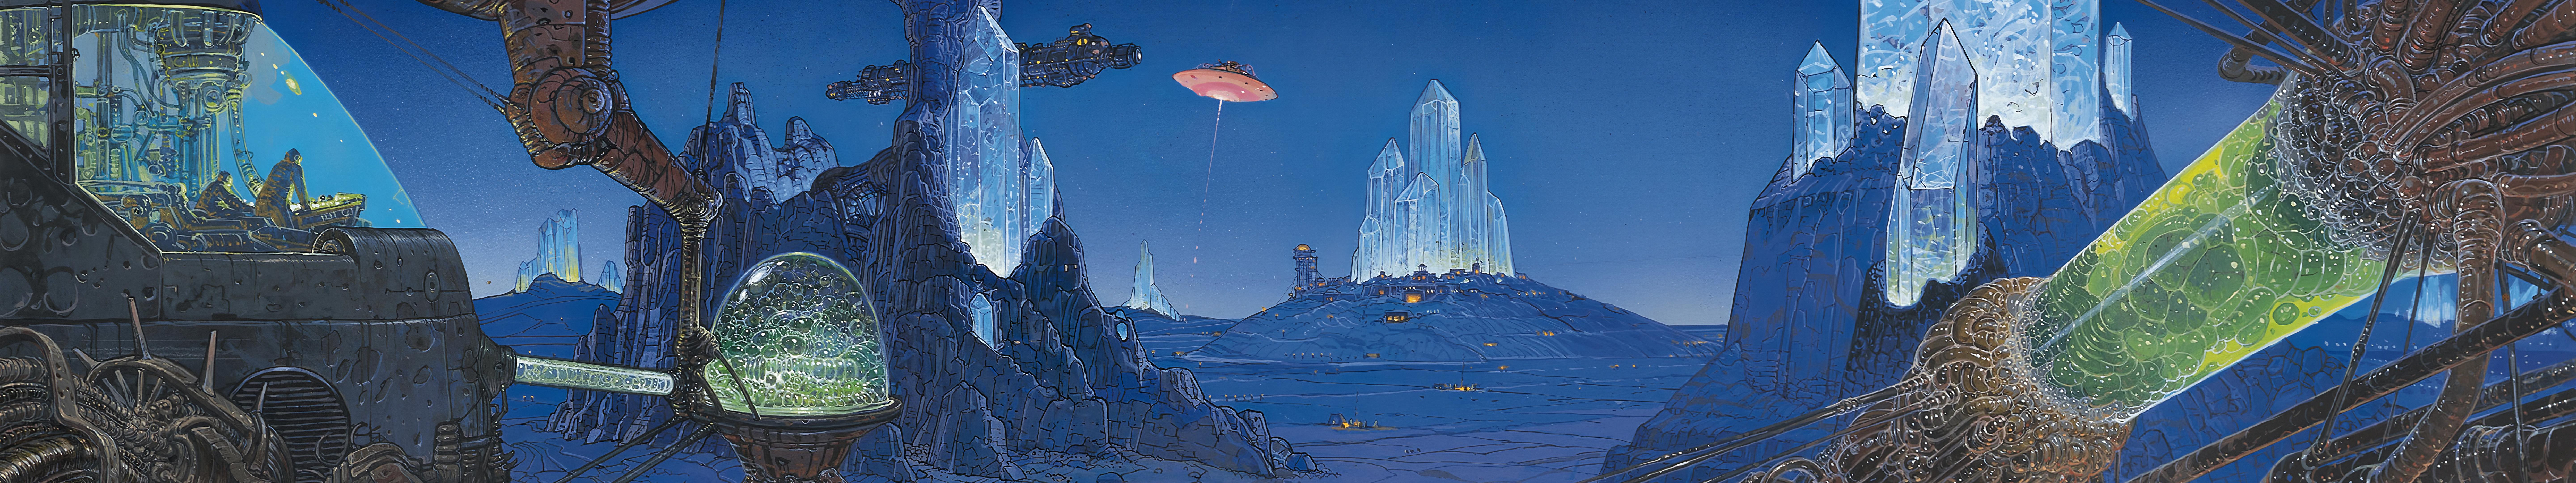 Crystal Shards by Moebius [11520x2160]